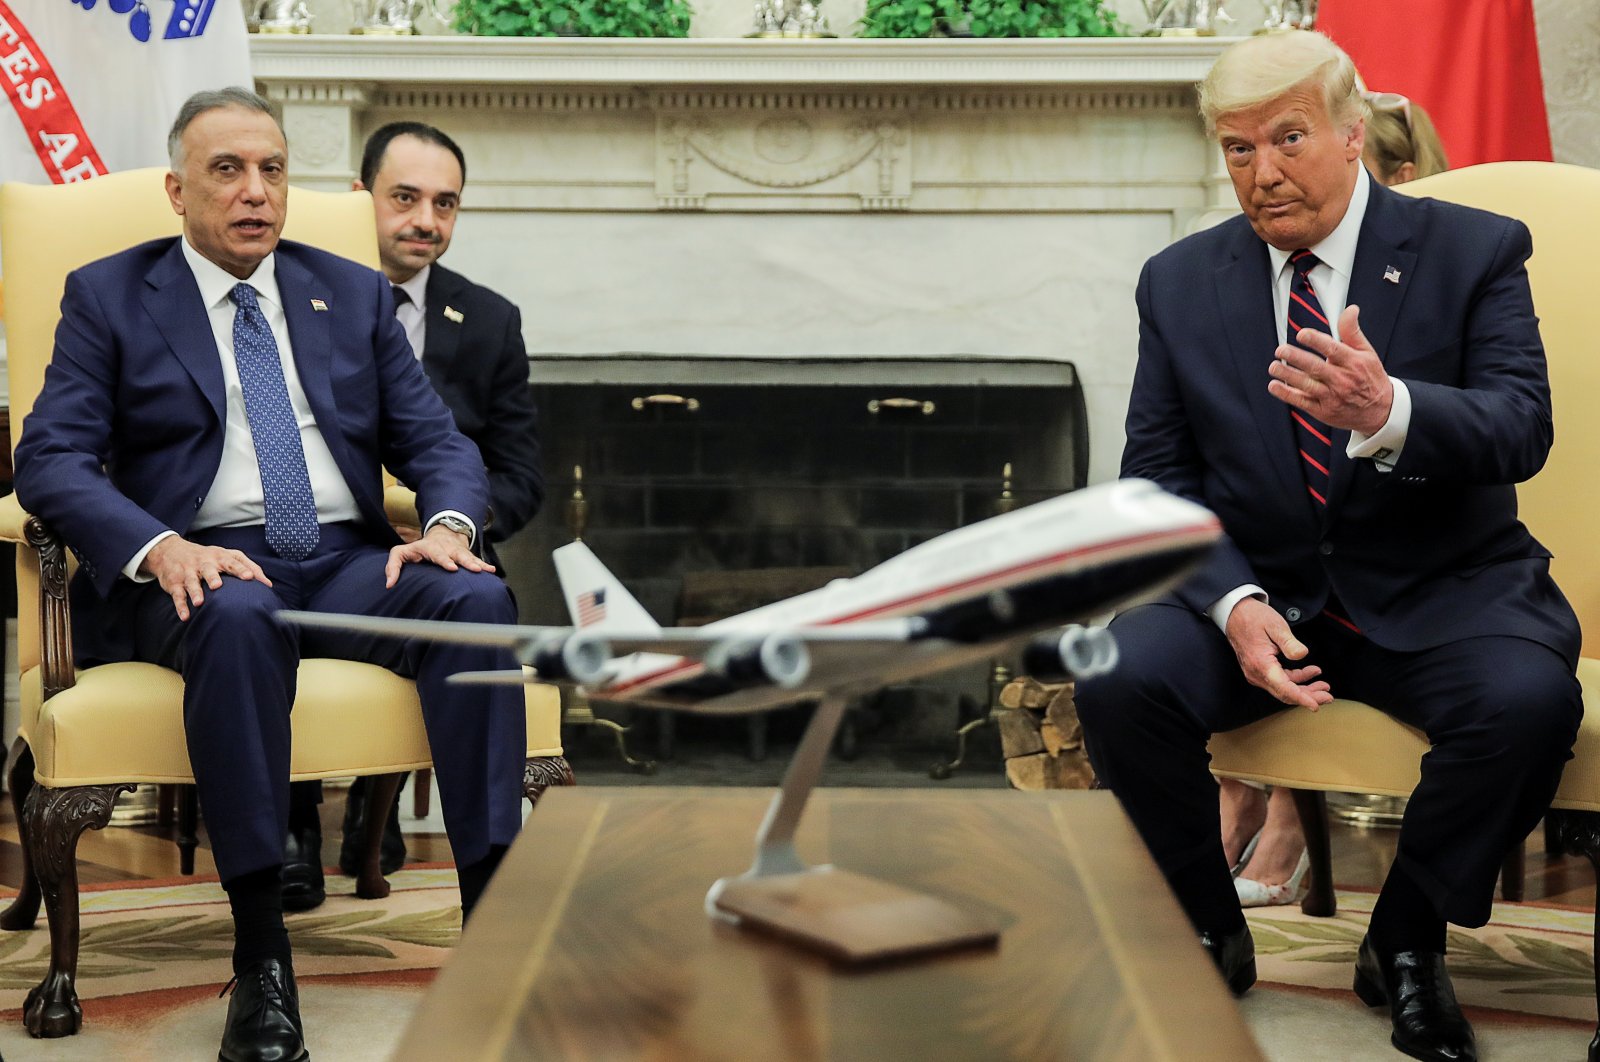 U.S. President Donald Trump speaks with Iraq's Prime Minister Mustafa al-Kadhimi as a translator listens in the Oval Office at the White House in Washington, August 20, 2020. (REUTERS Photo)